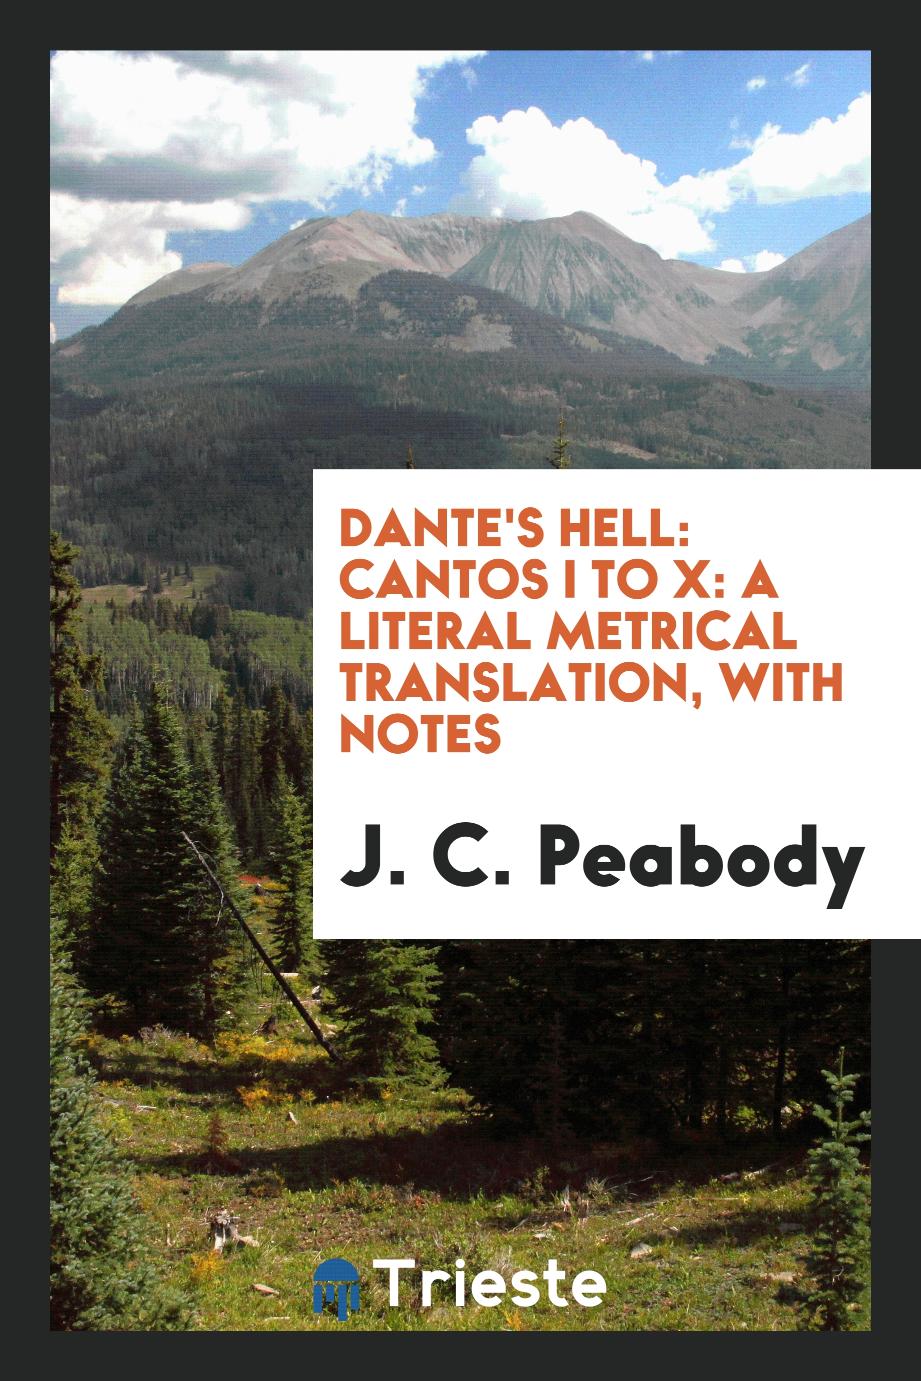 Dante's Hell: Cantos I to X: A Literal Metrical Translation, with Notes